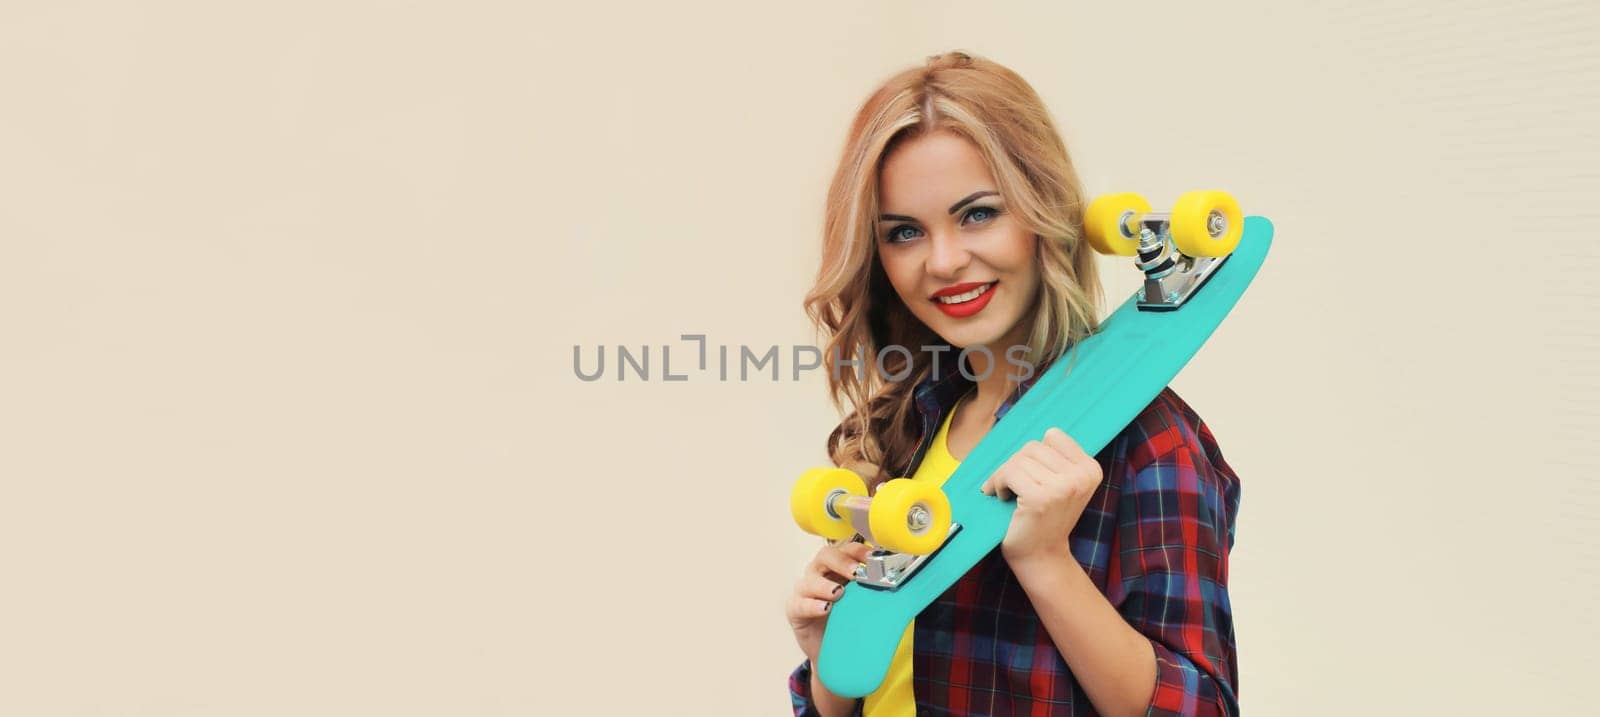 Portrait of stylish young blonde woman posing with skateboard on city street against white wall background, blank copy space